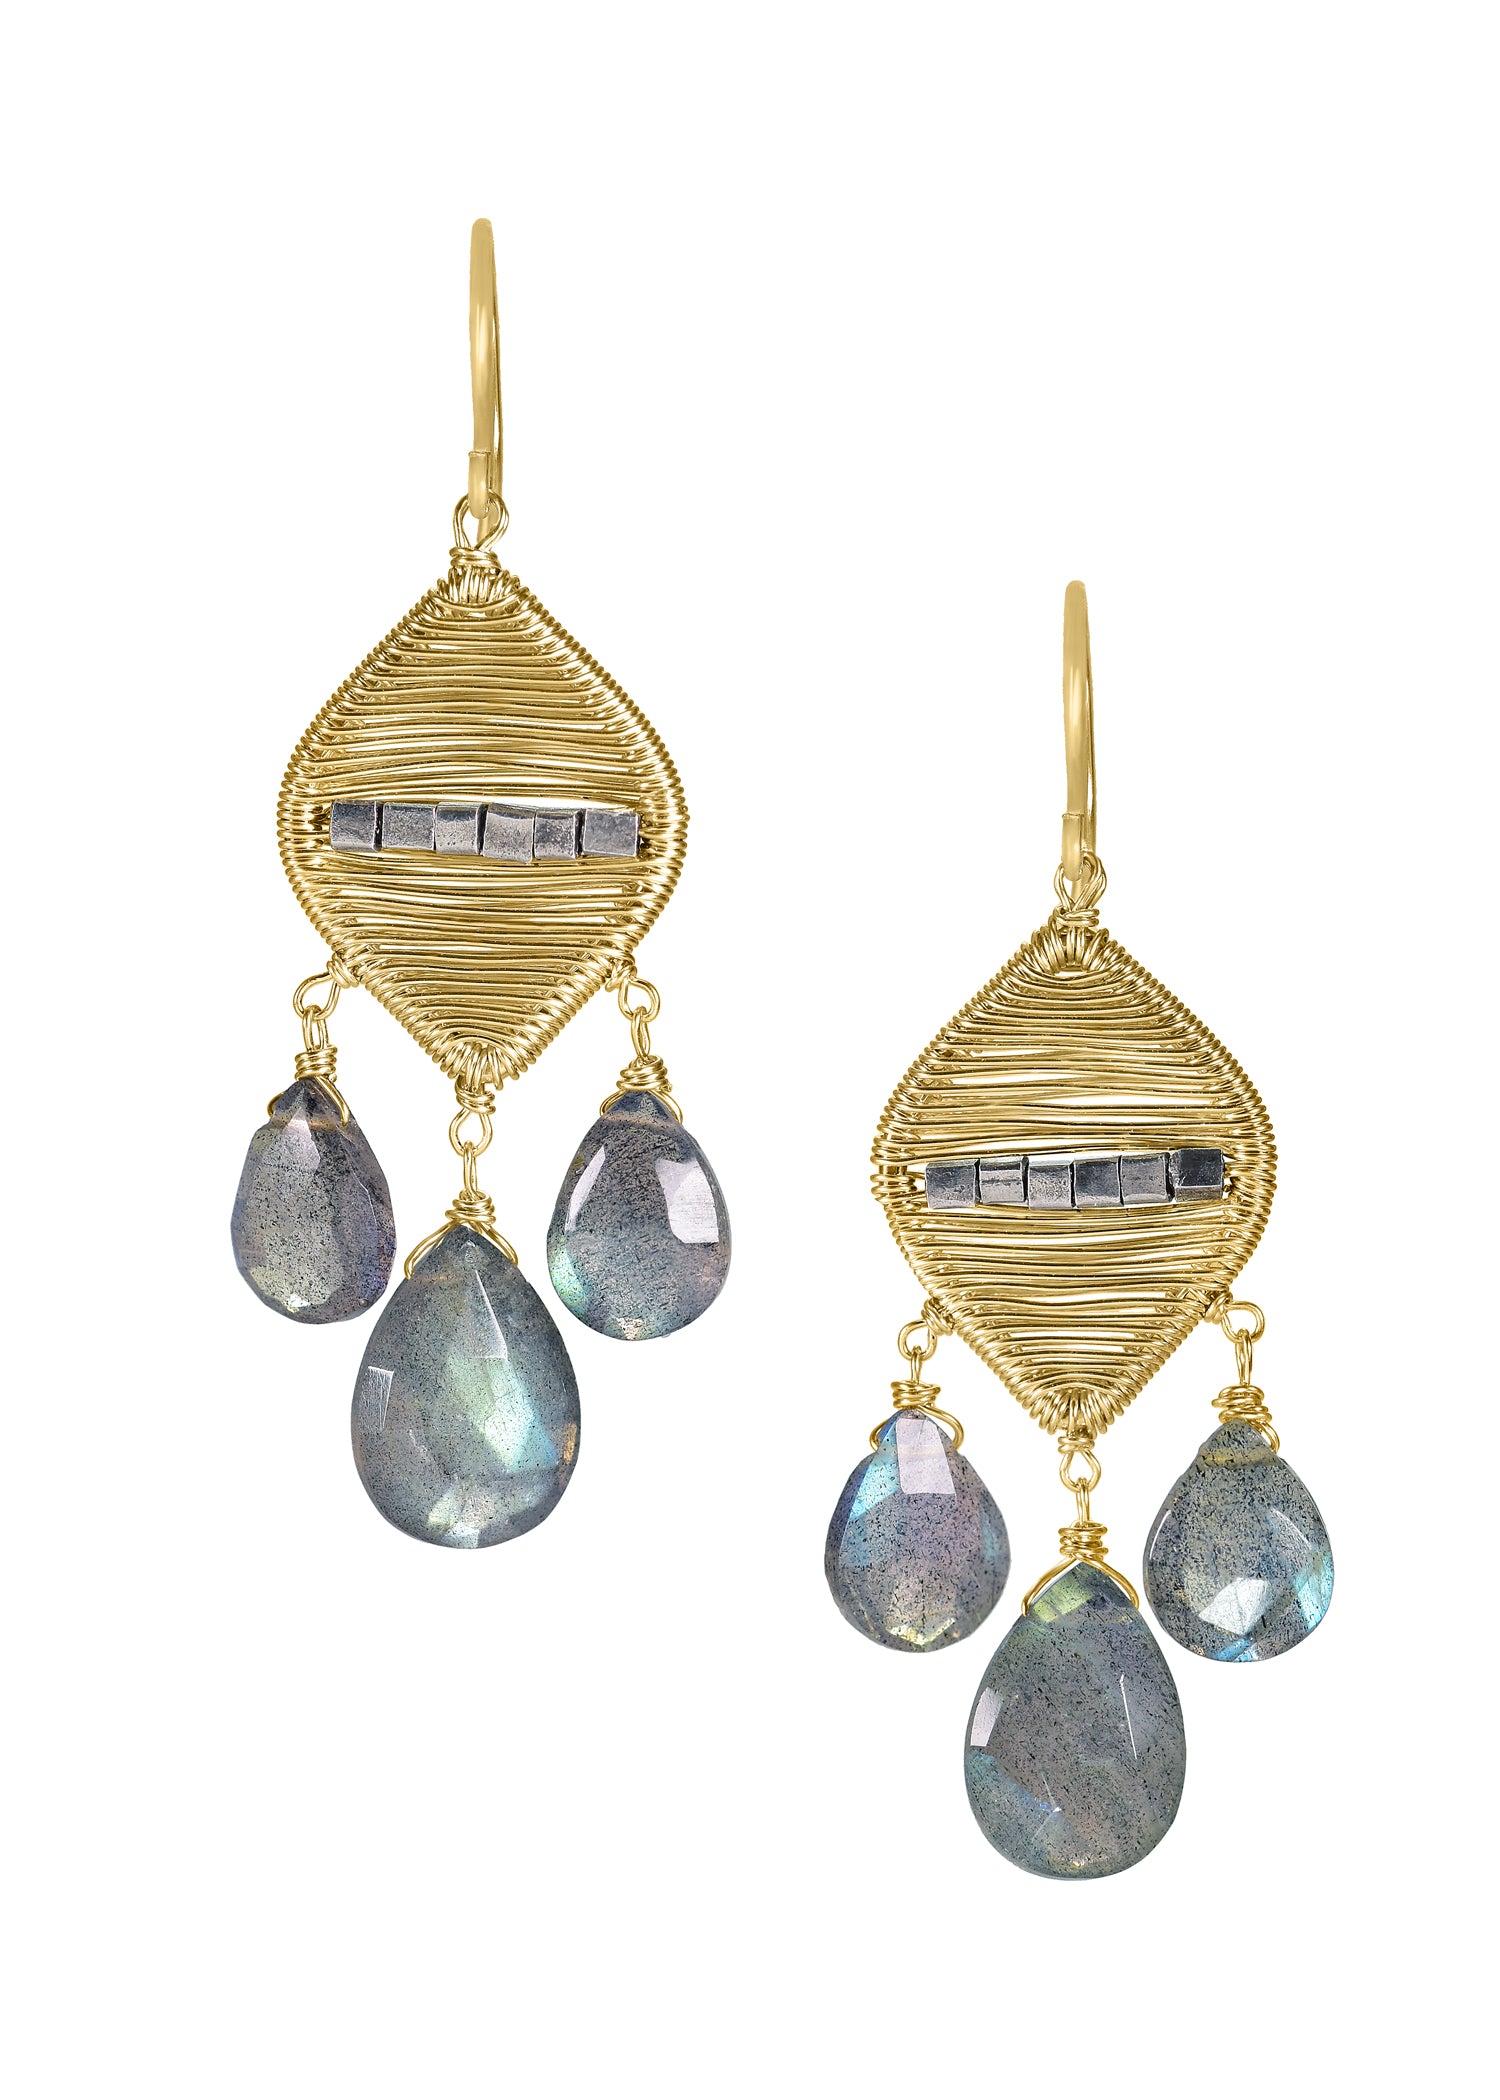 Labradorite 14k gold fill Sterling silver Mixed metal Earrings measure 1-3/4" in length (including the ear wires) and 9/16" in width at the widest point Handmade in our Los Angeles studio